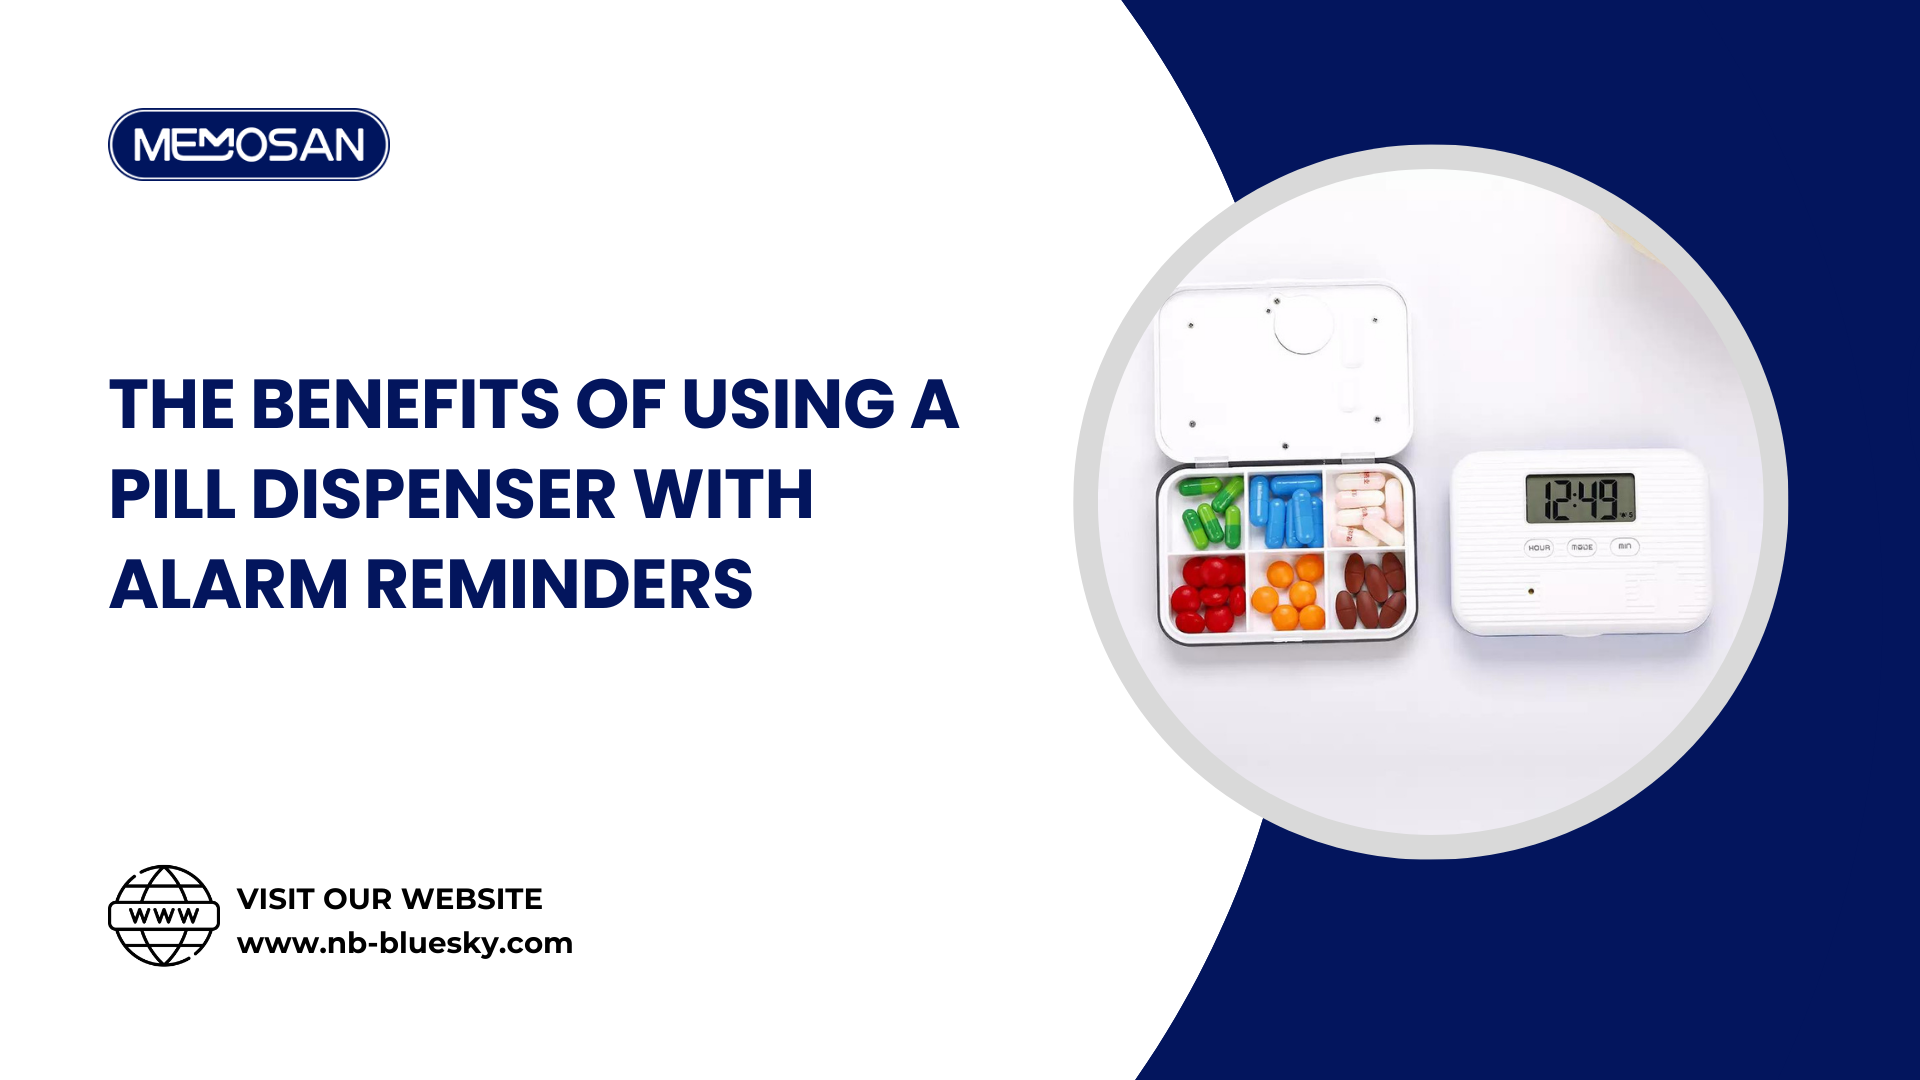 The Benefits of Using a Pill Dispenser with Alarm Reminders